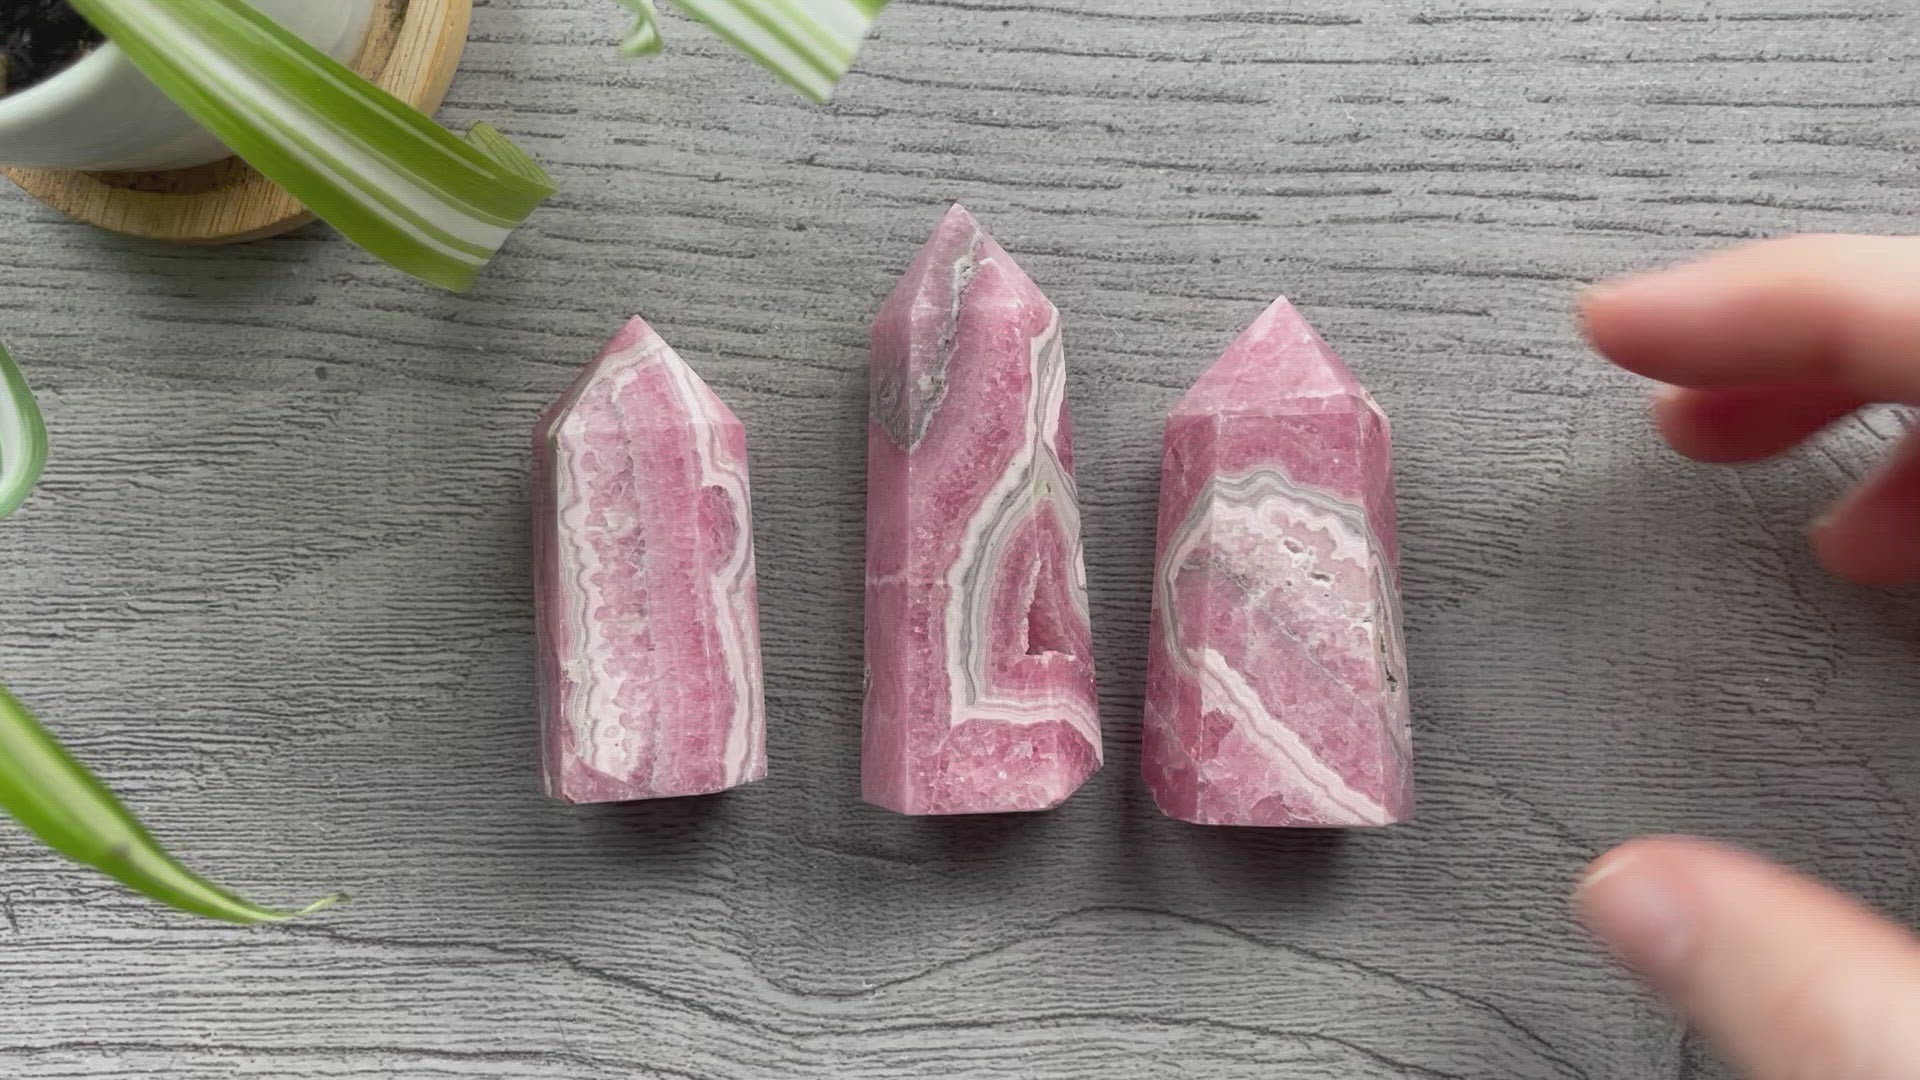 Pictured are various points of rhodochrosite.